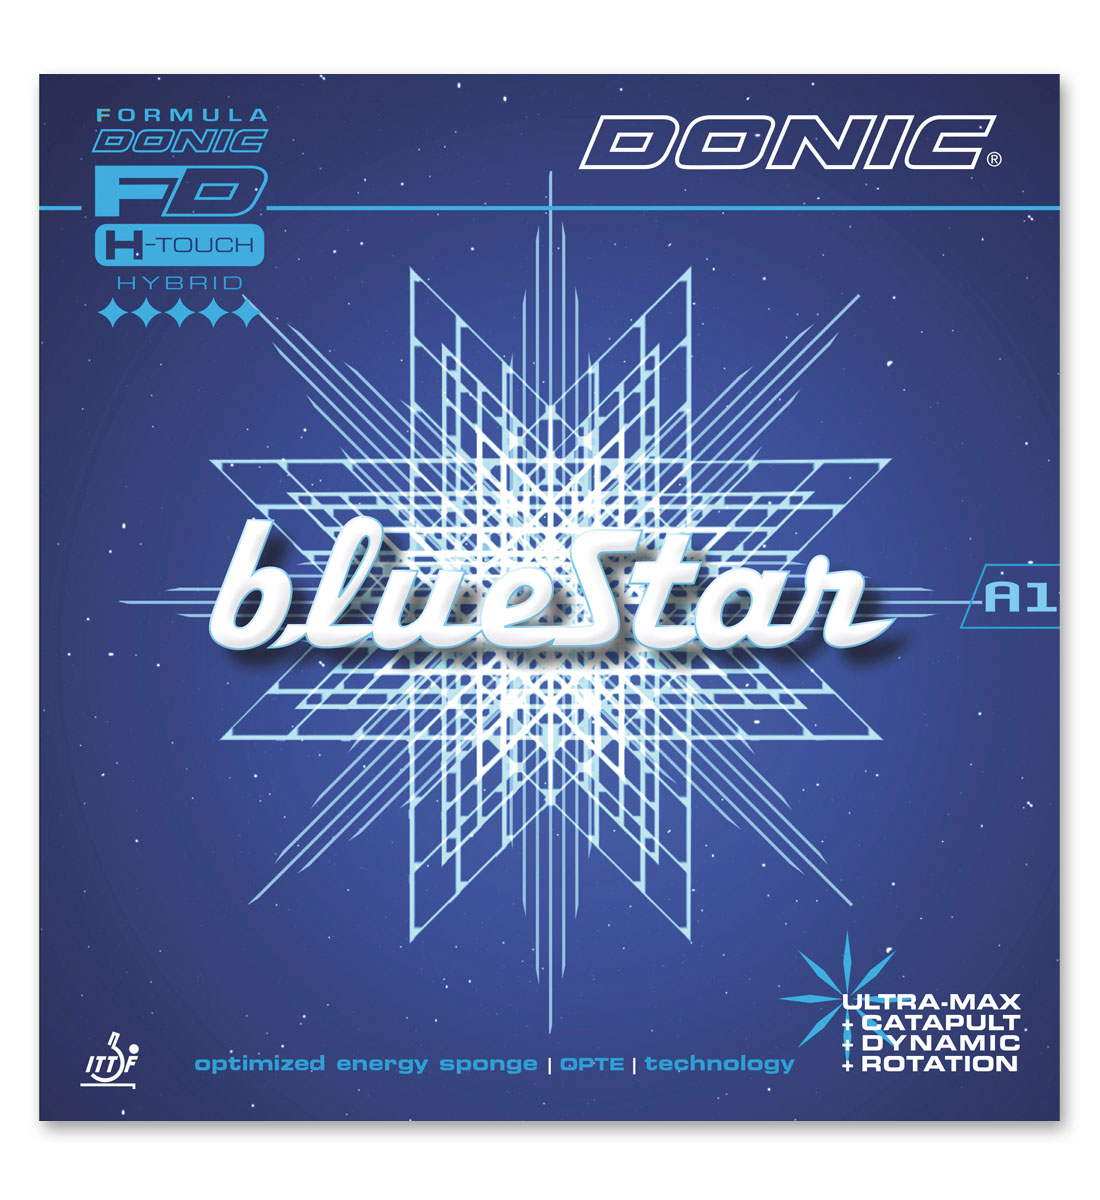 Donic BlueStar A1 Questions & Answers